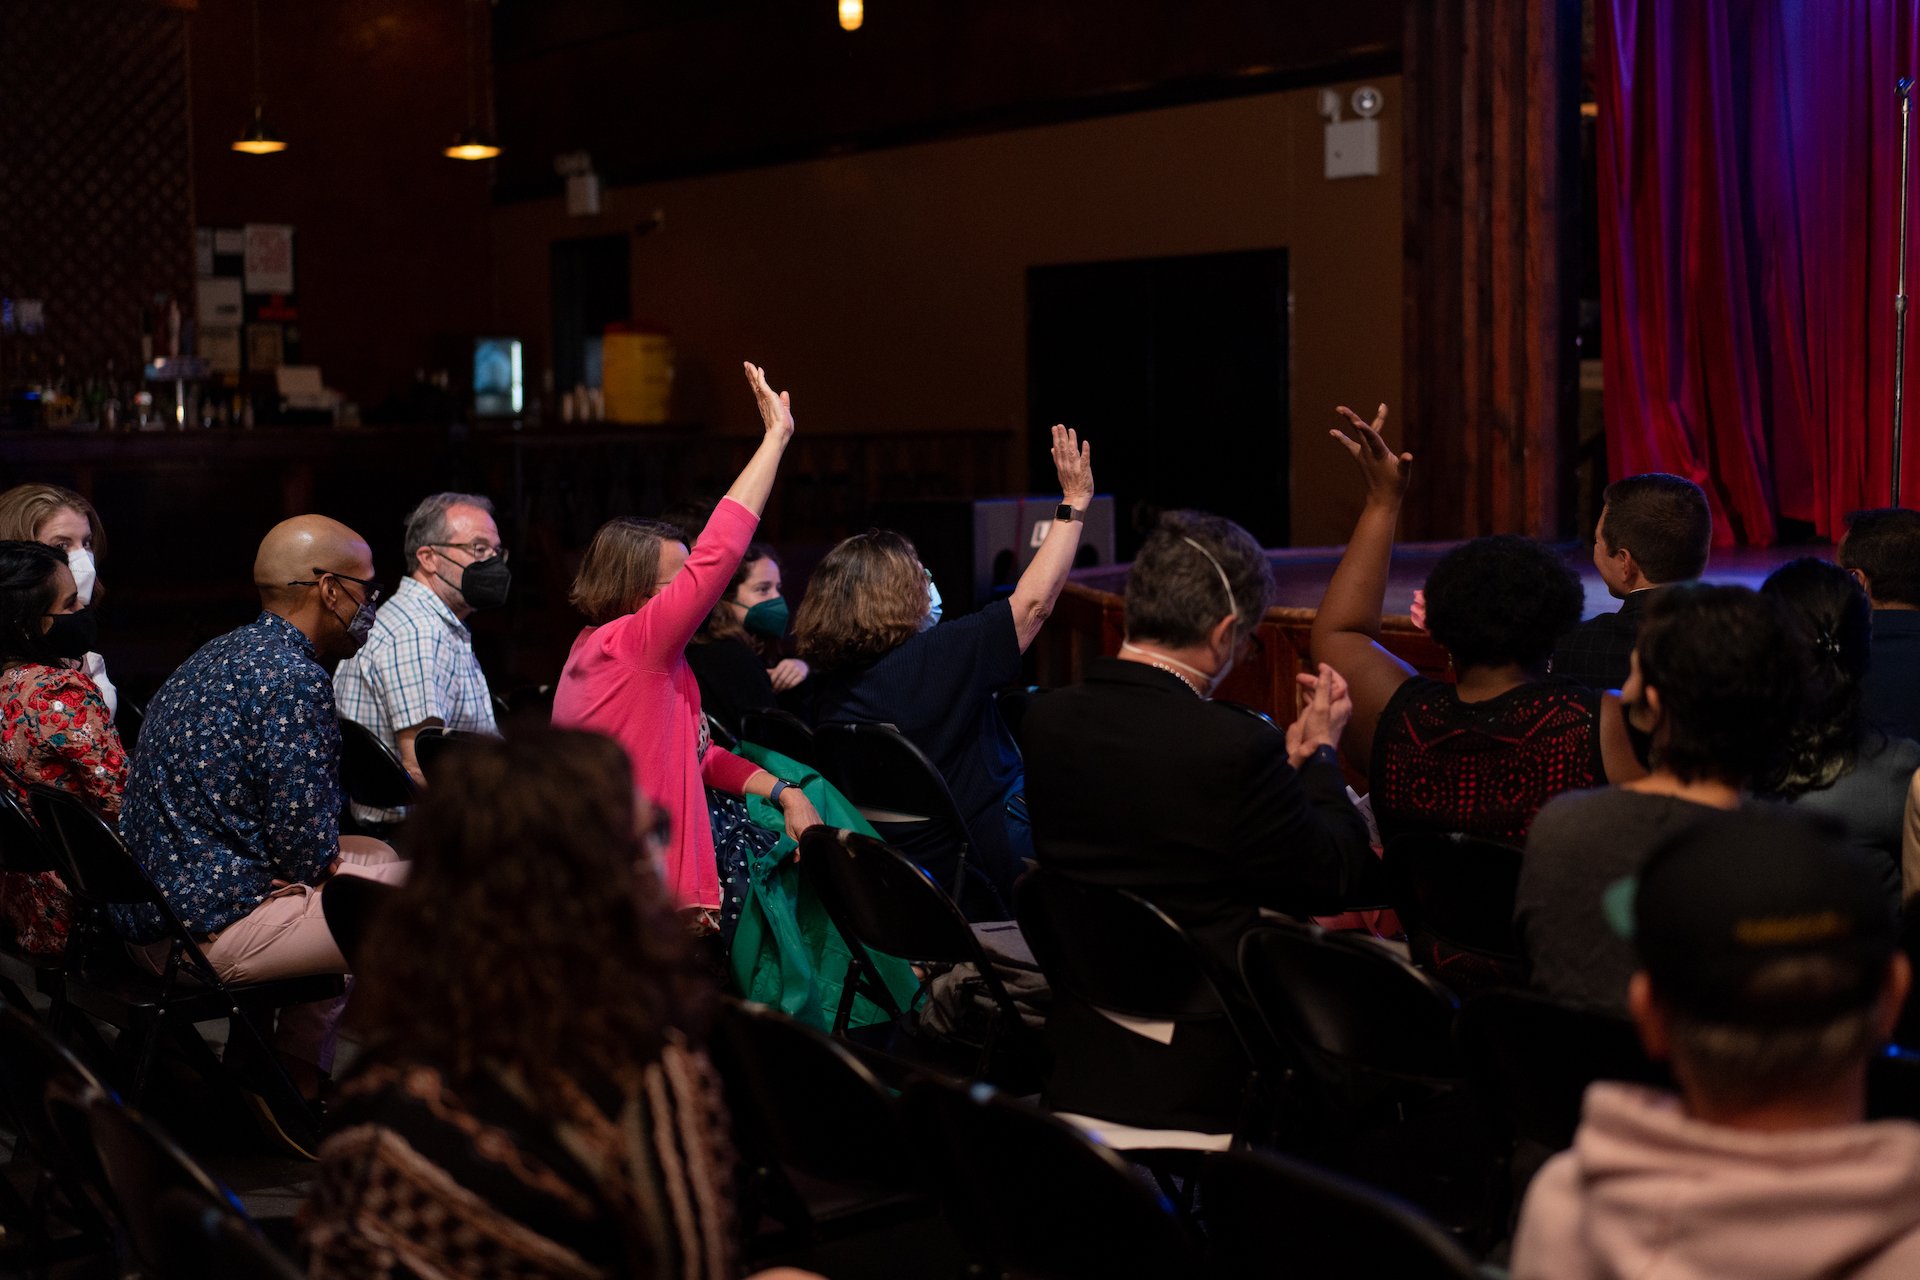  Guests at Proton Prom raise their hands to donate to the Story Collider.  